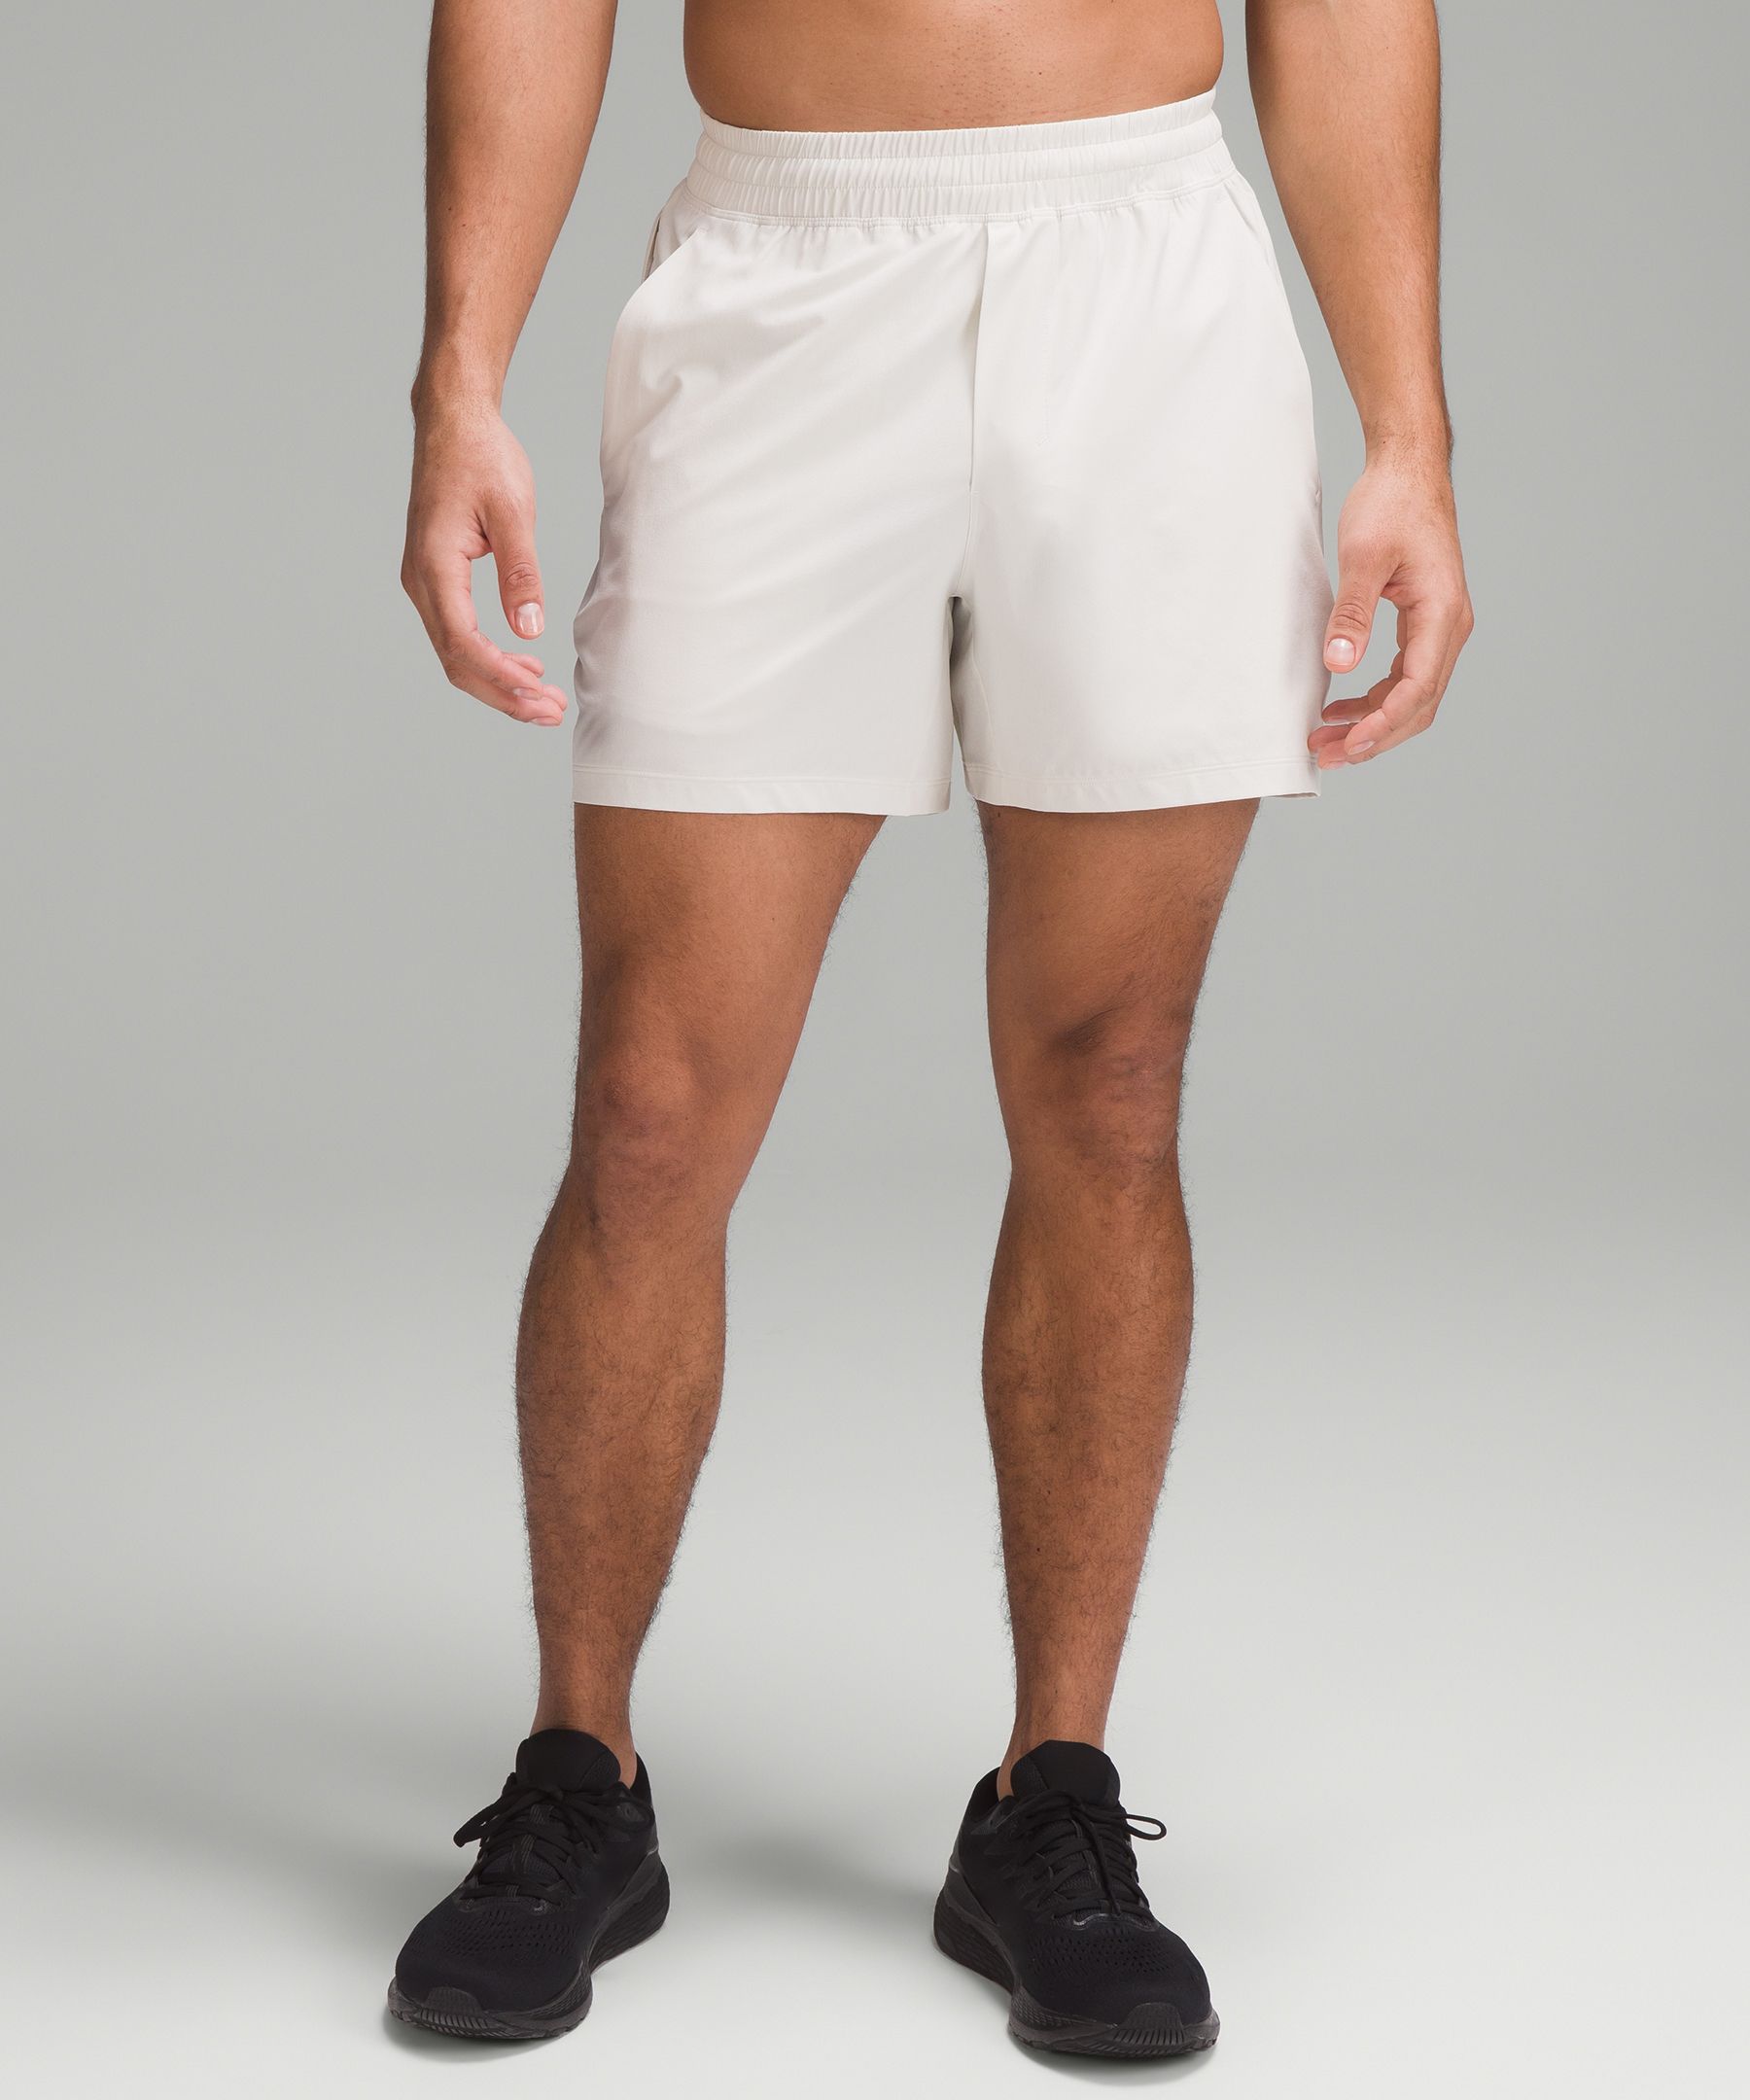 The Quests 5 Compression Lined Shorts